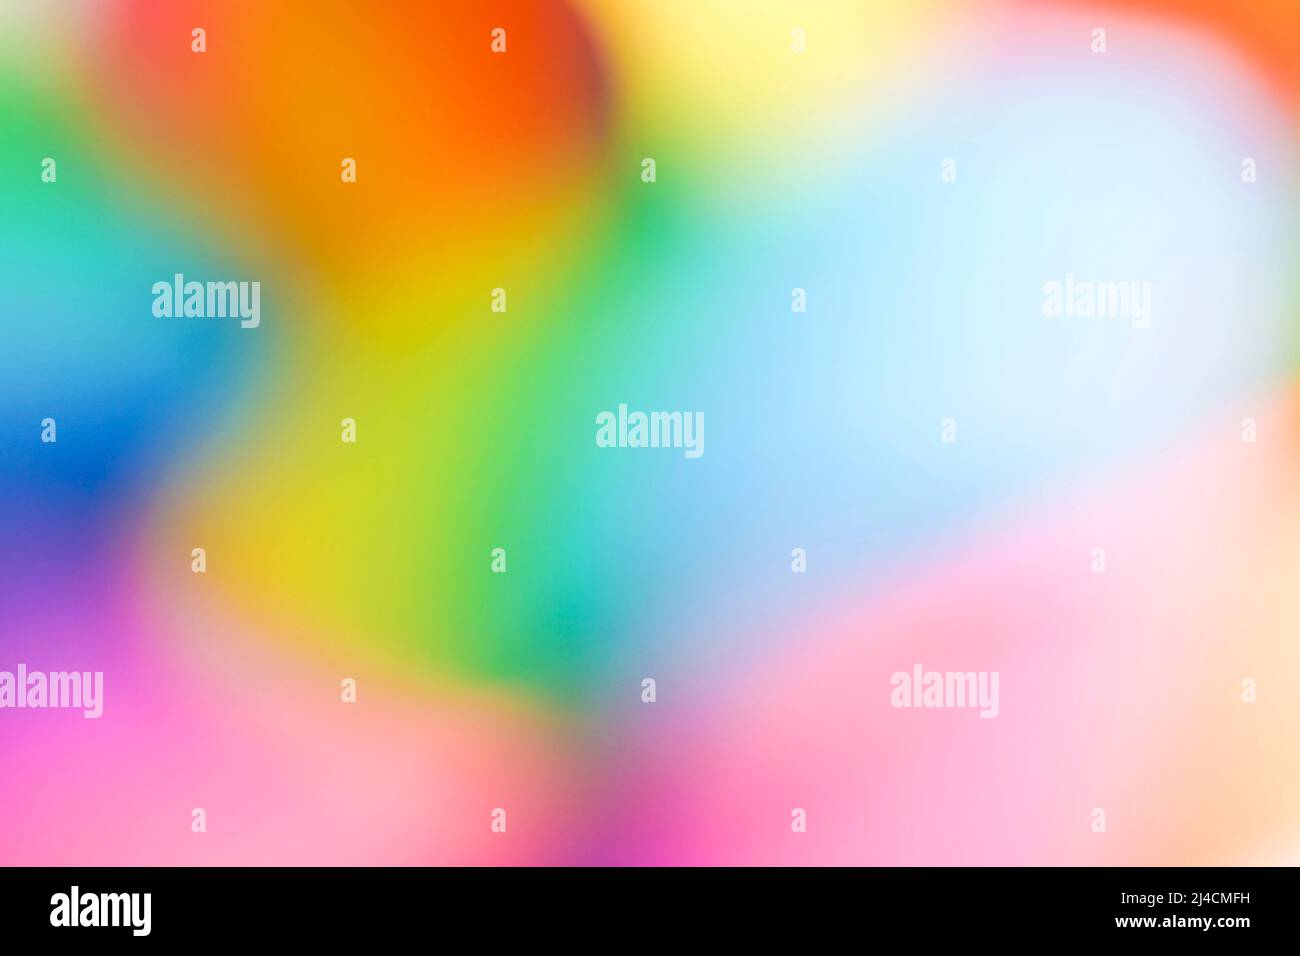 Colorful rainbow and abstract background with vibrant colors Stock Photo